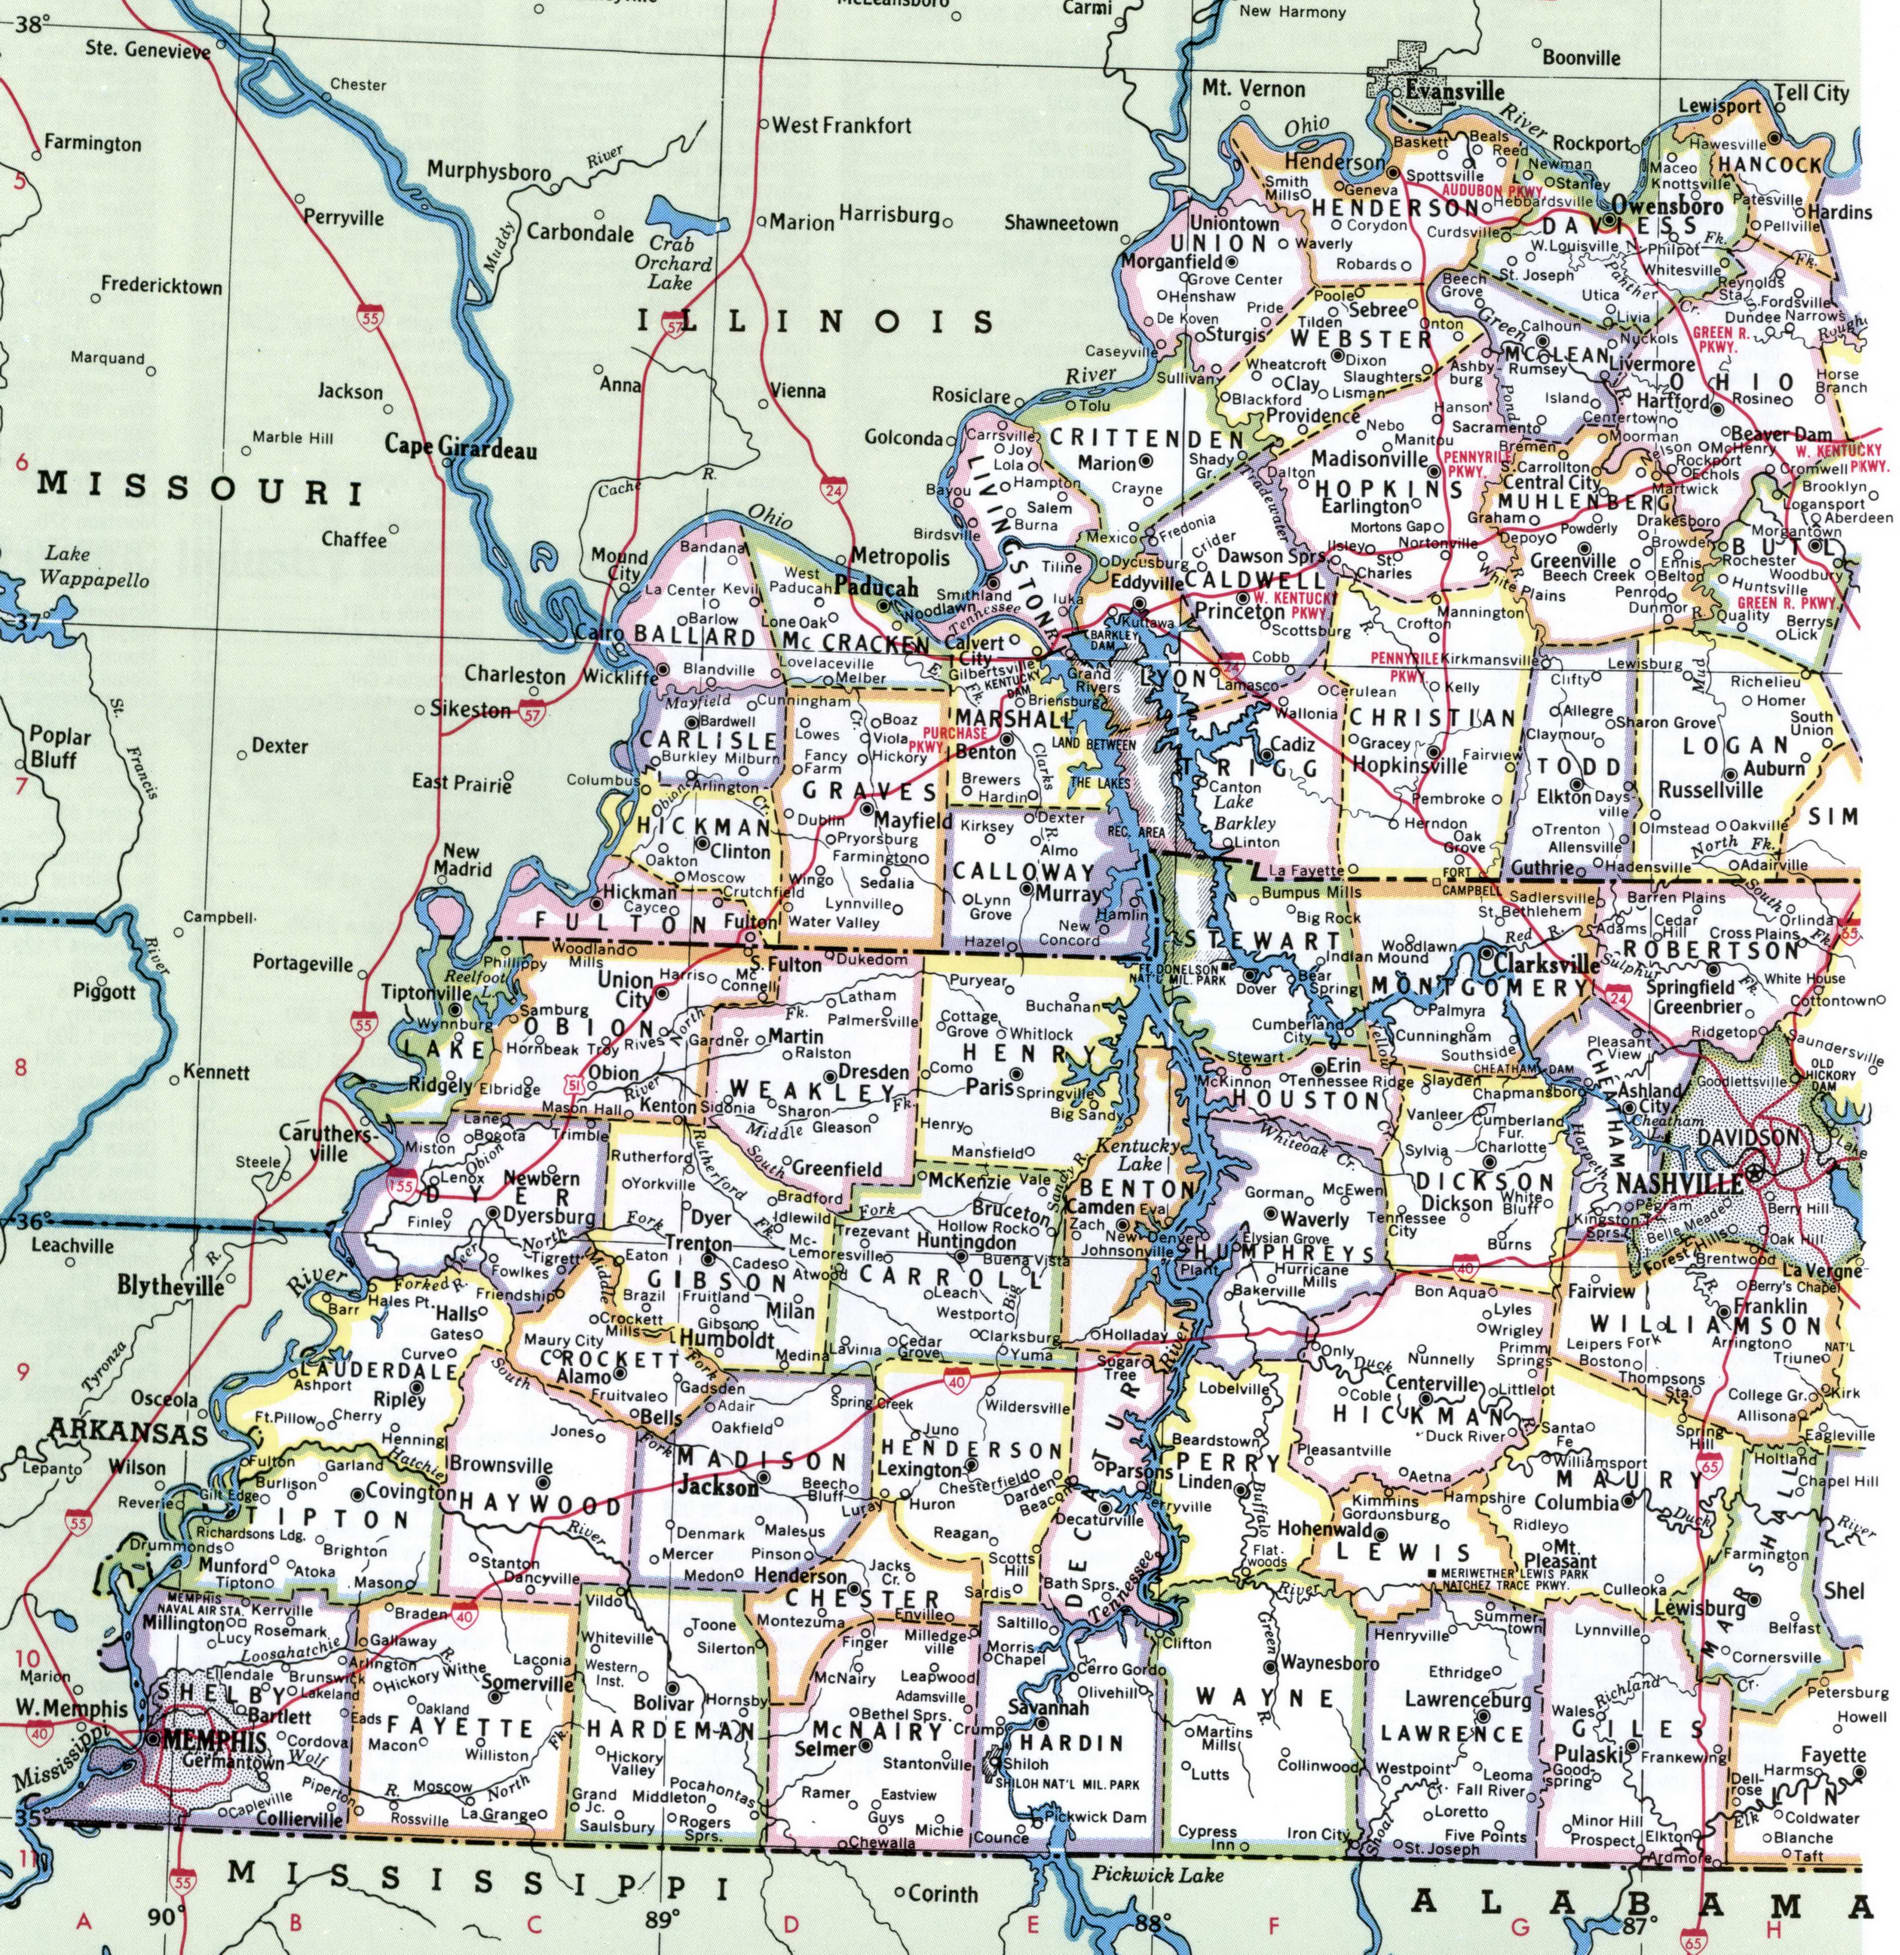 map-of-tennessee-showing-county-with-cities-road-highways-counties